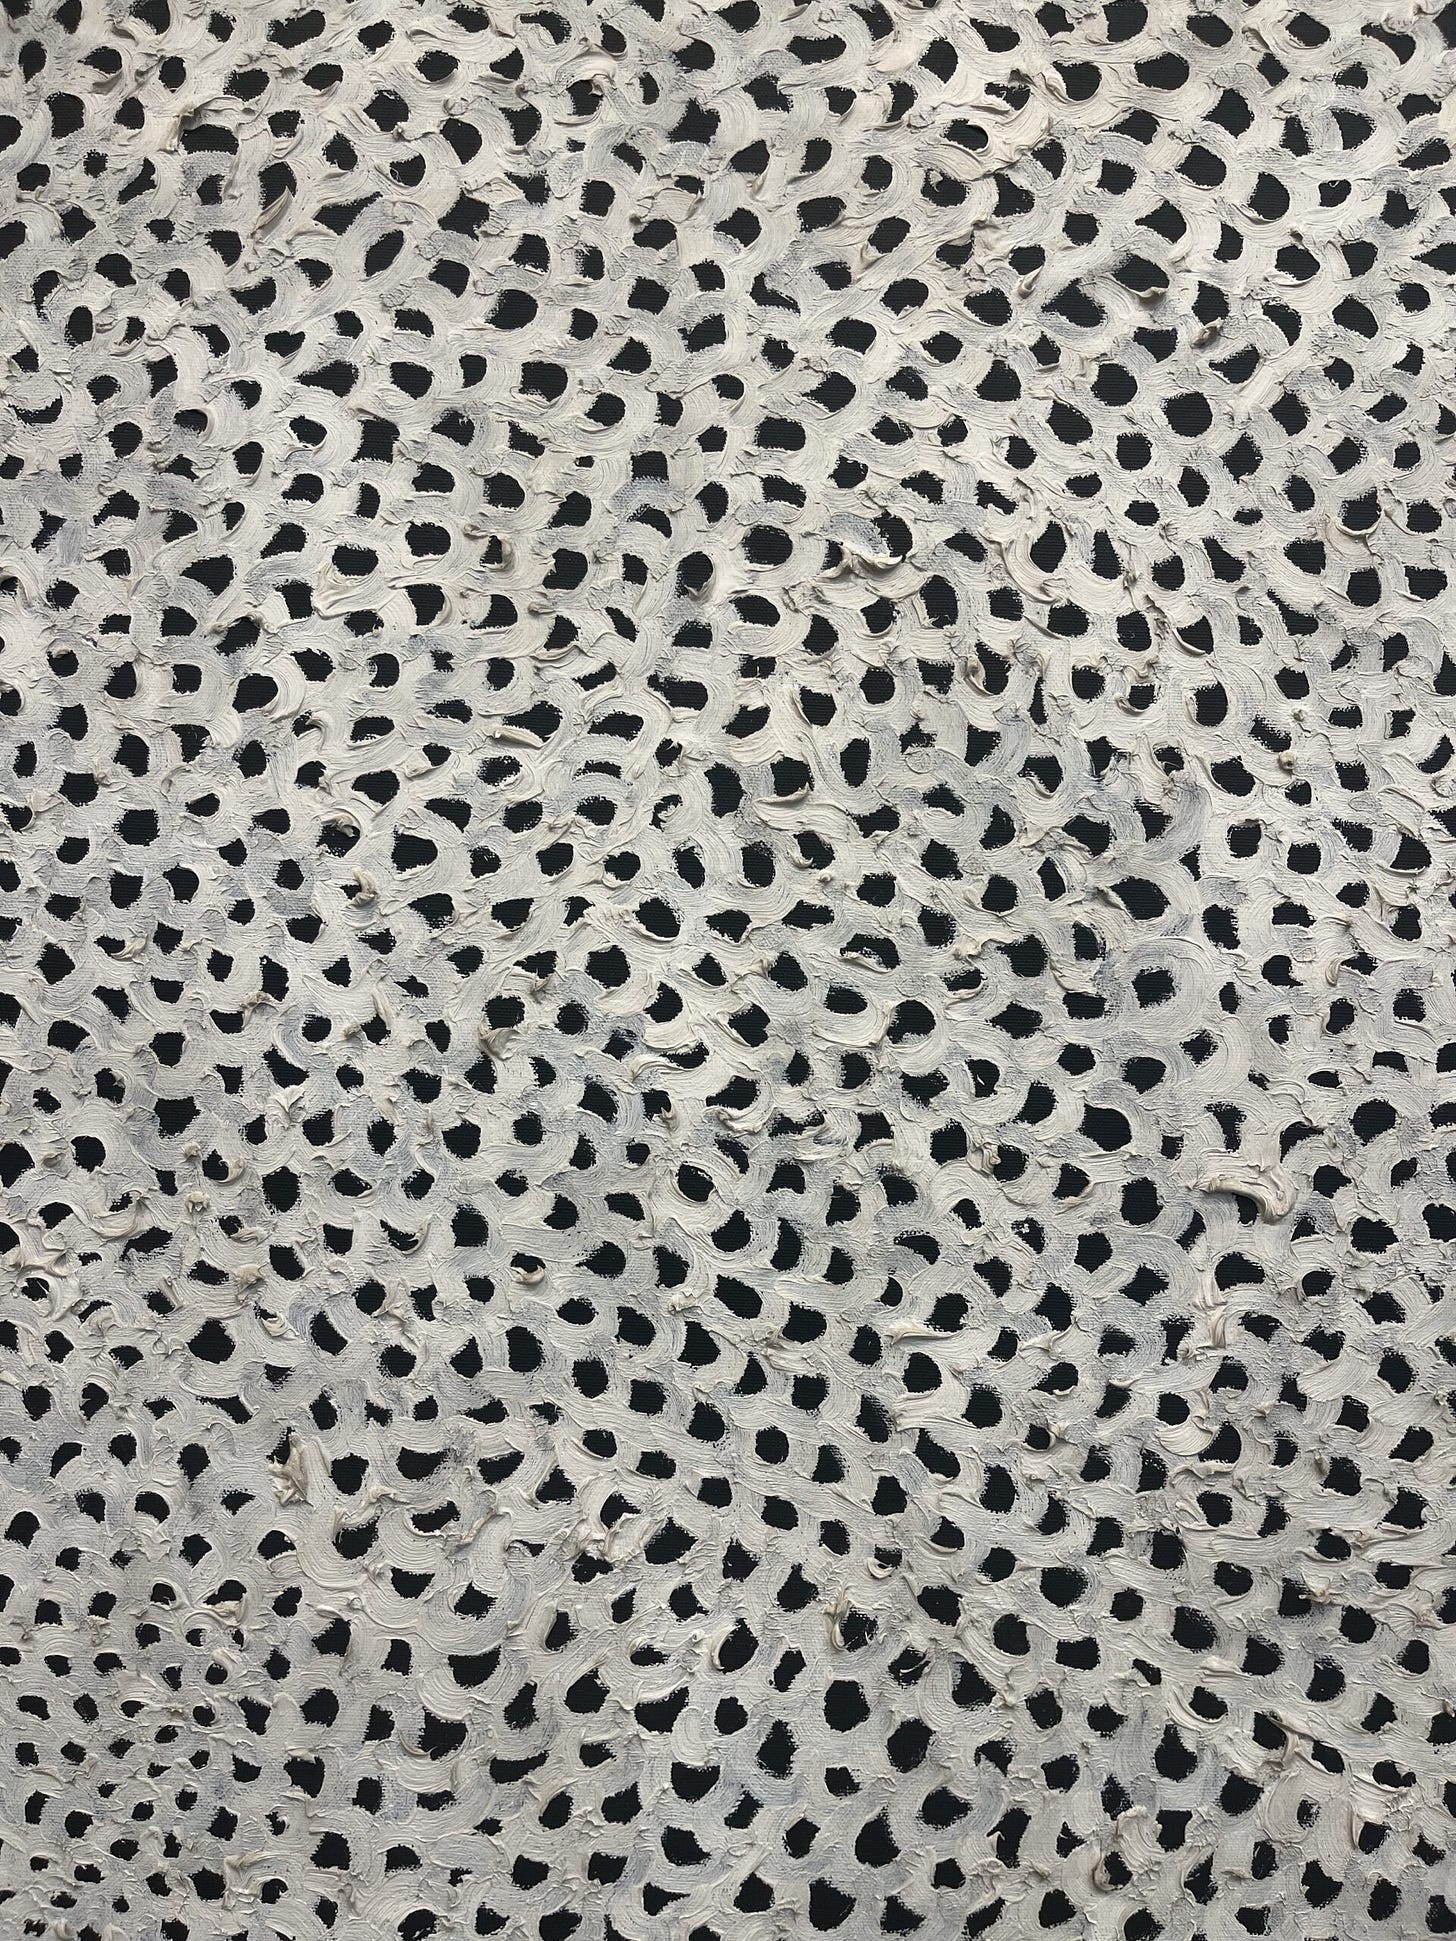 What Is the Meaning of Yayoi Kusama's Infinity Nets?